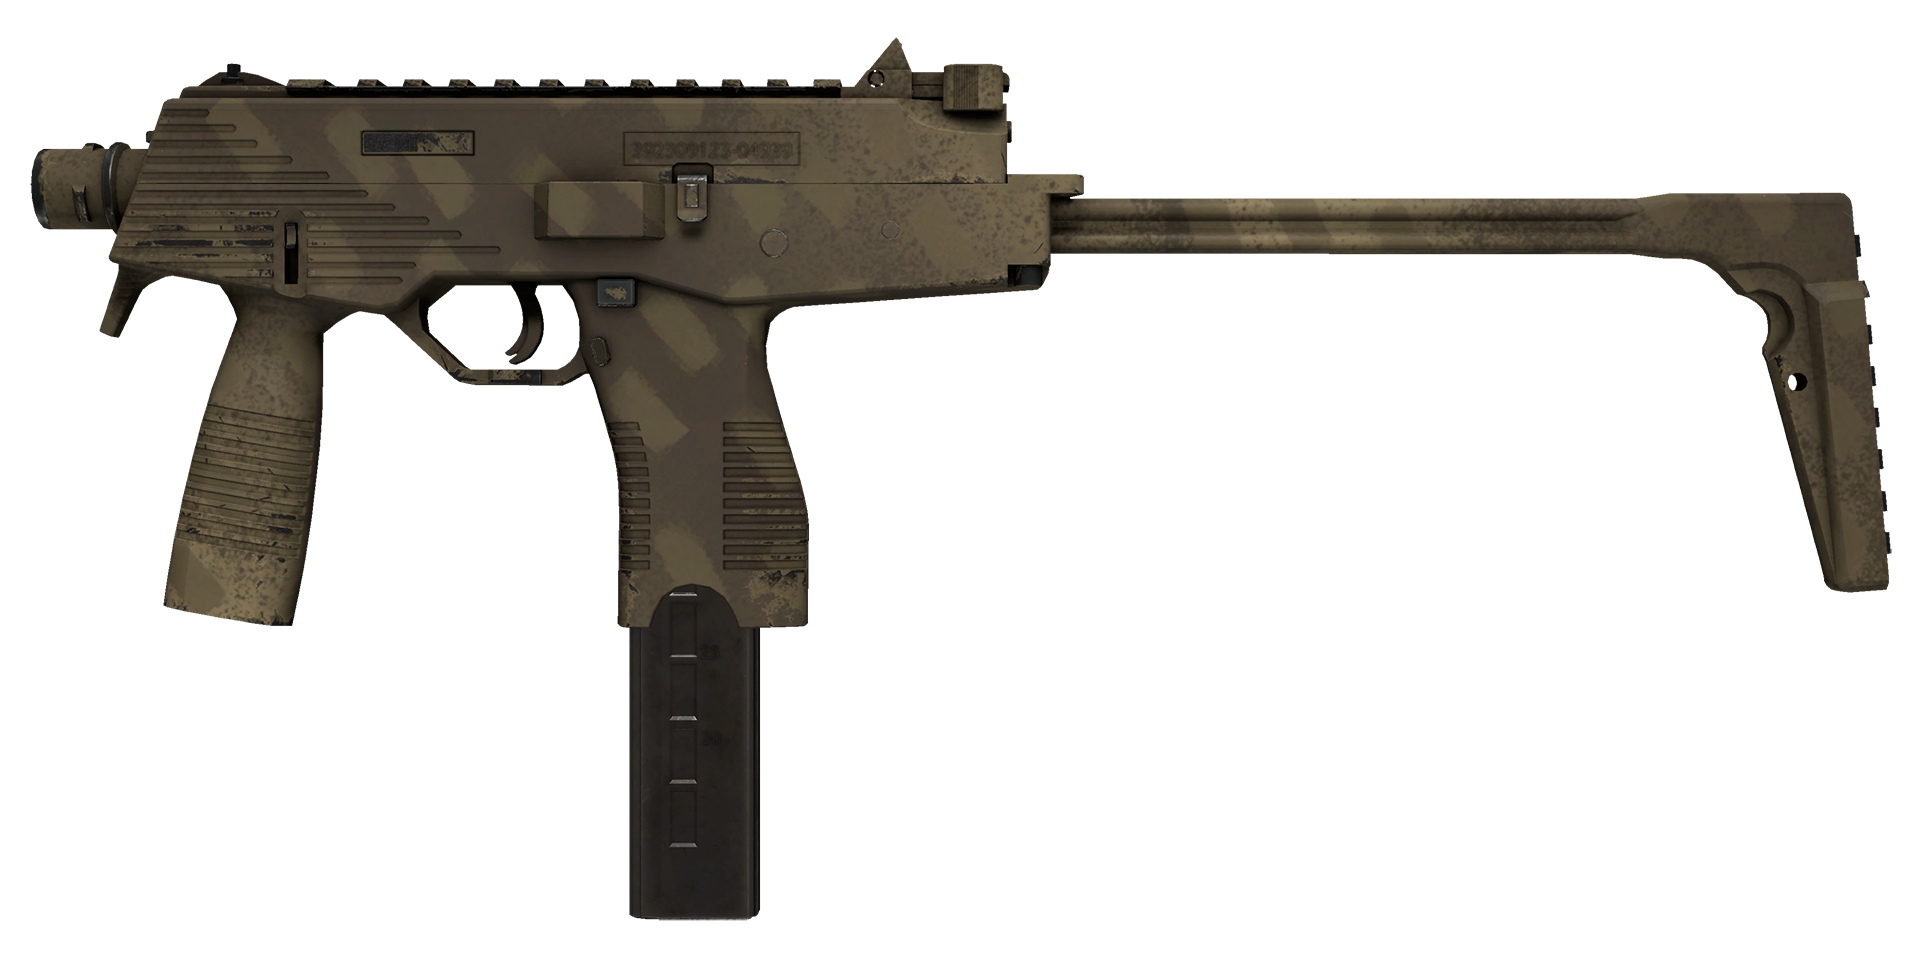 PP-Bizon Sand Dashed cs go skin download the new version for ipod